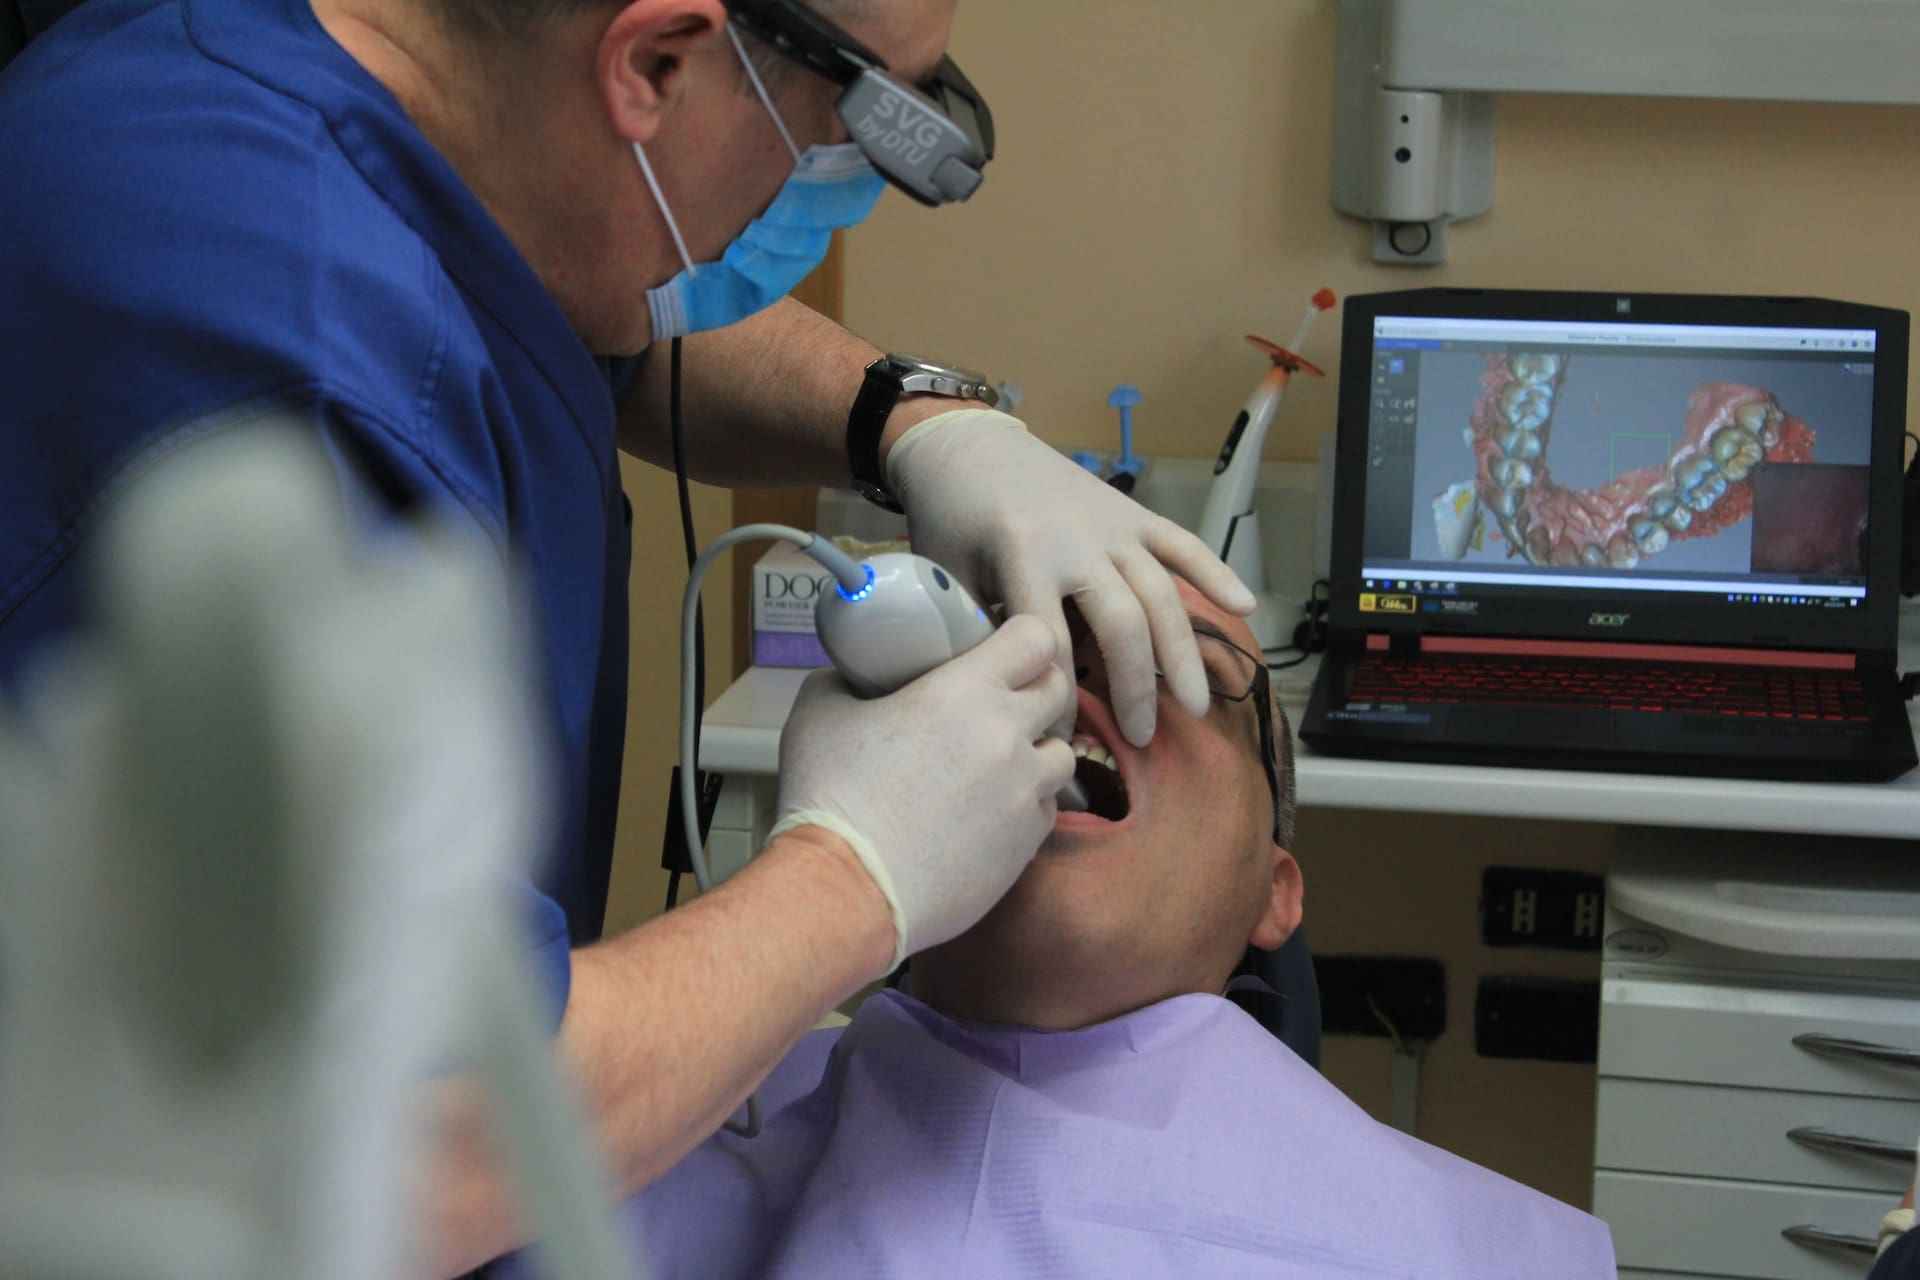 Dentist placing dental instrument in the mouth of the patient during dental treatment.